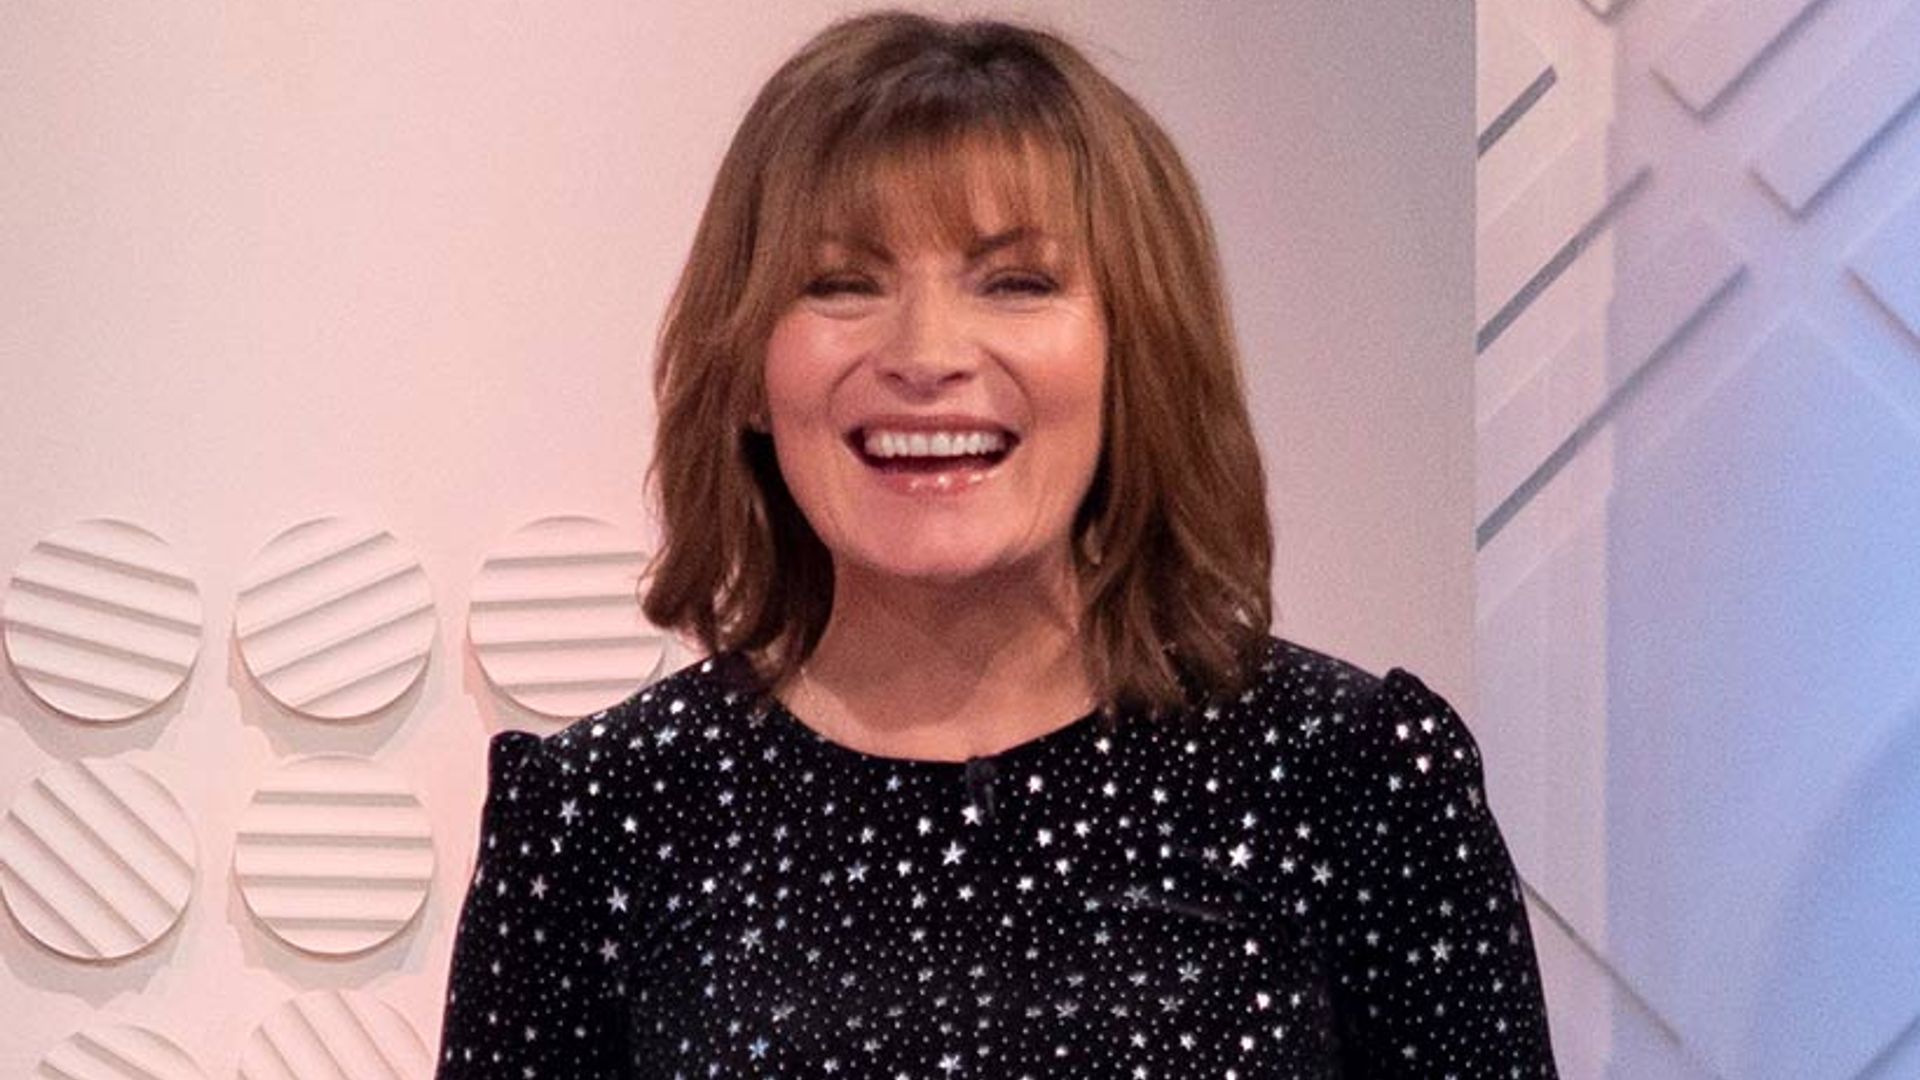 Lorraine Kelly has a Jessica Rabbit moment in the most stunning sequin red dress